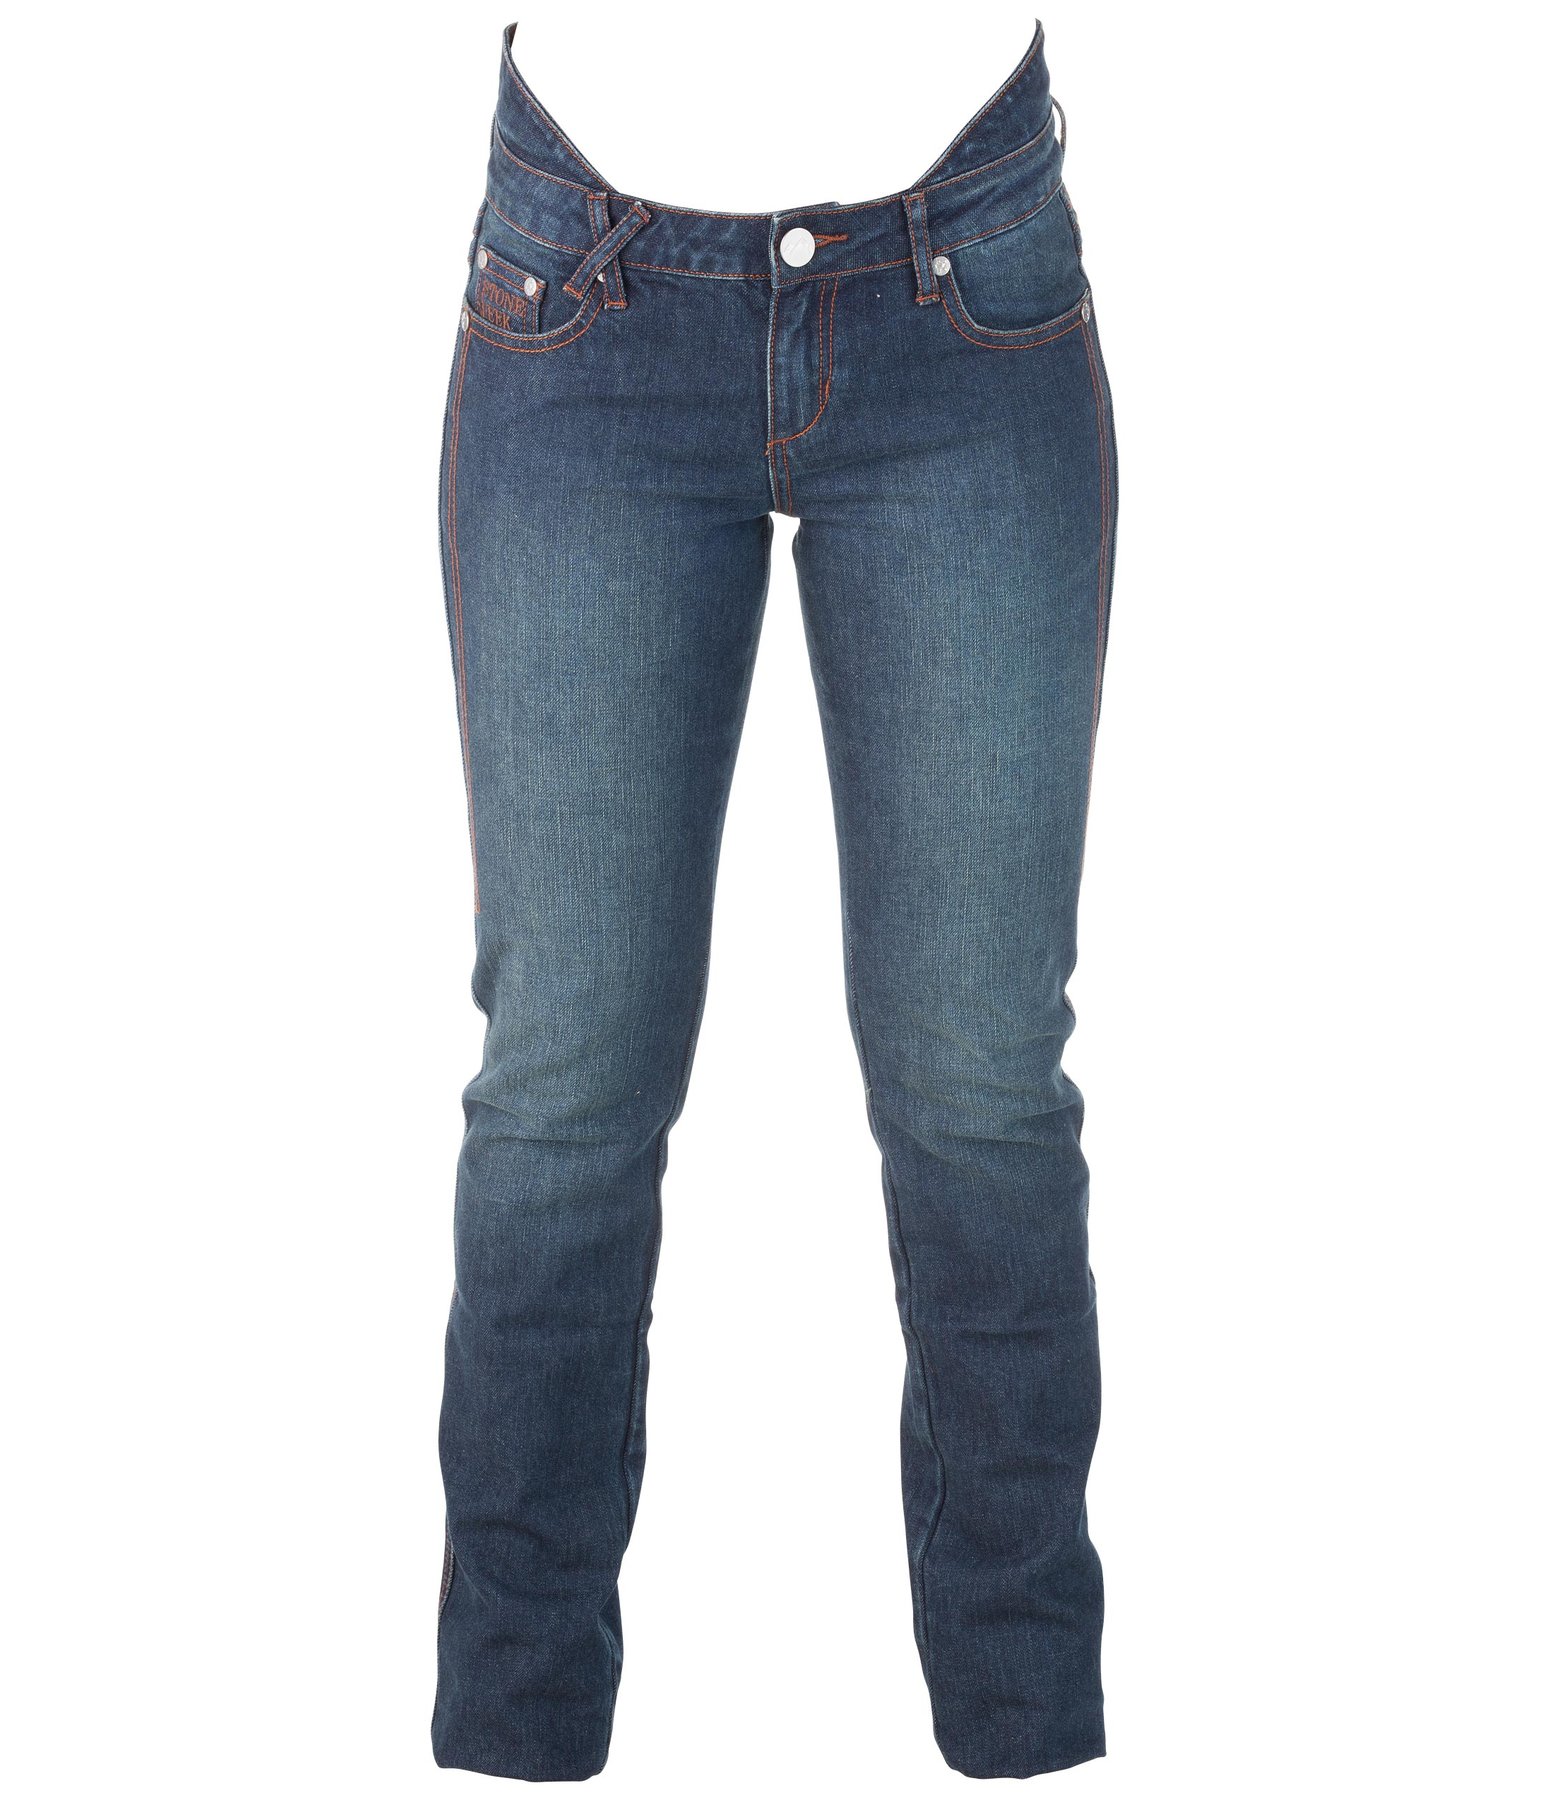 western riding jeans